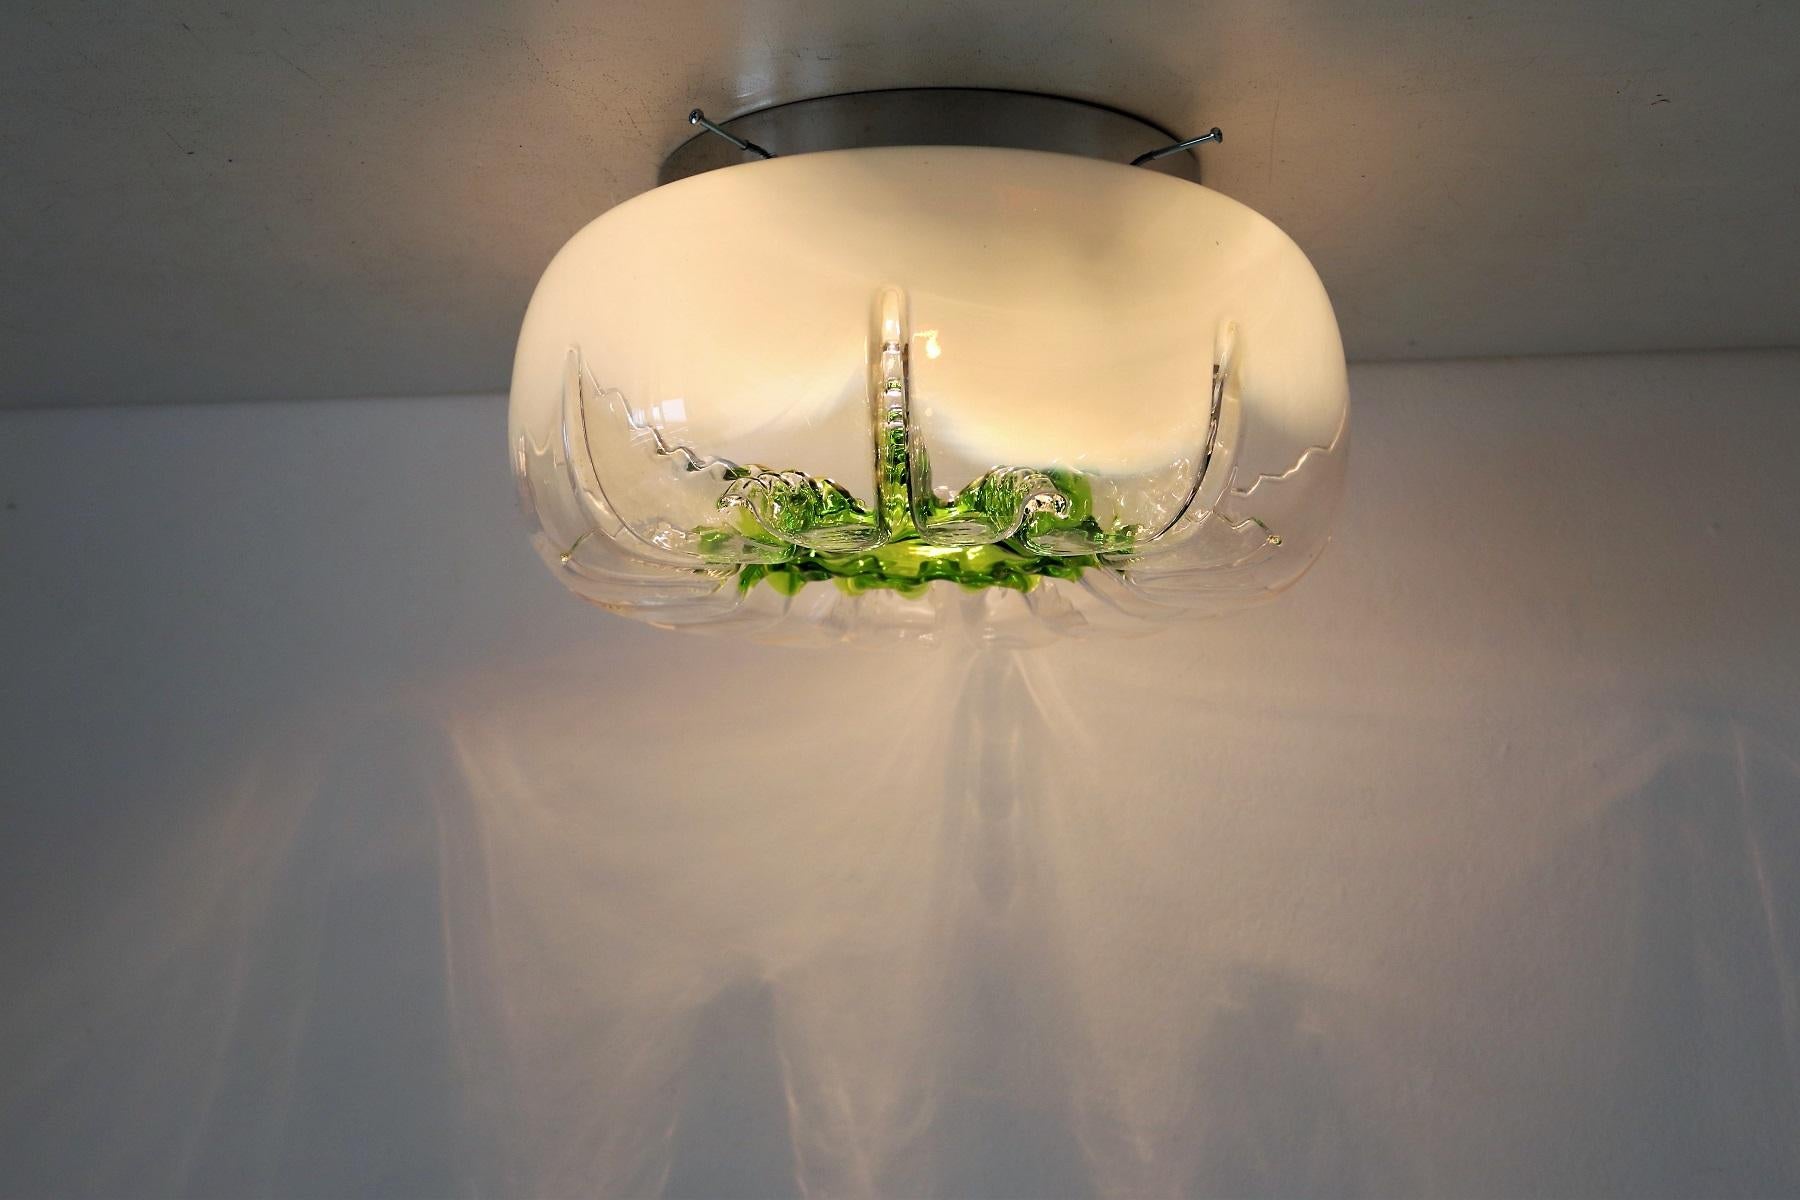 Gorgeous flush-mount light in green - transparent Murano glass, fixed with screws to an aluminium base.
The flush mount can be mounted to ceiling as well to the wall.
Designed in the 70s in the style of Angelo Brotto, and made in Italy.
Very good